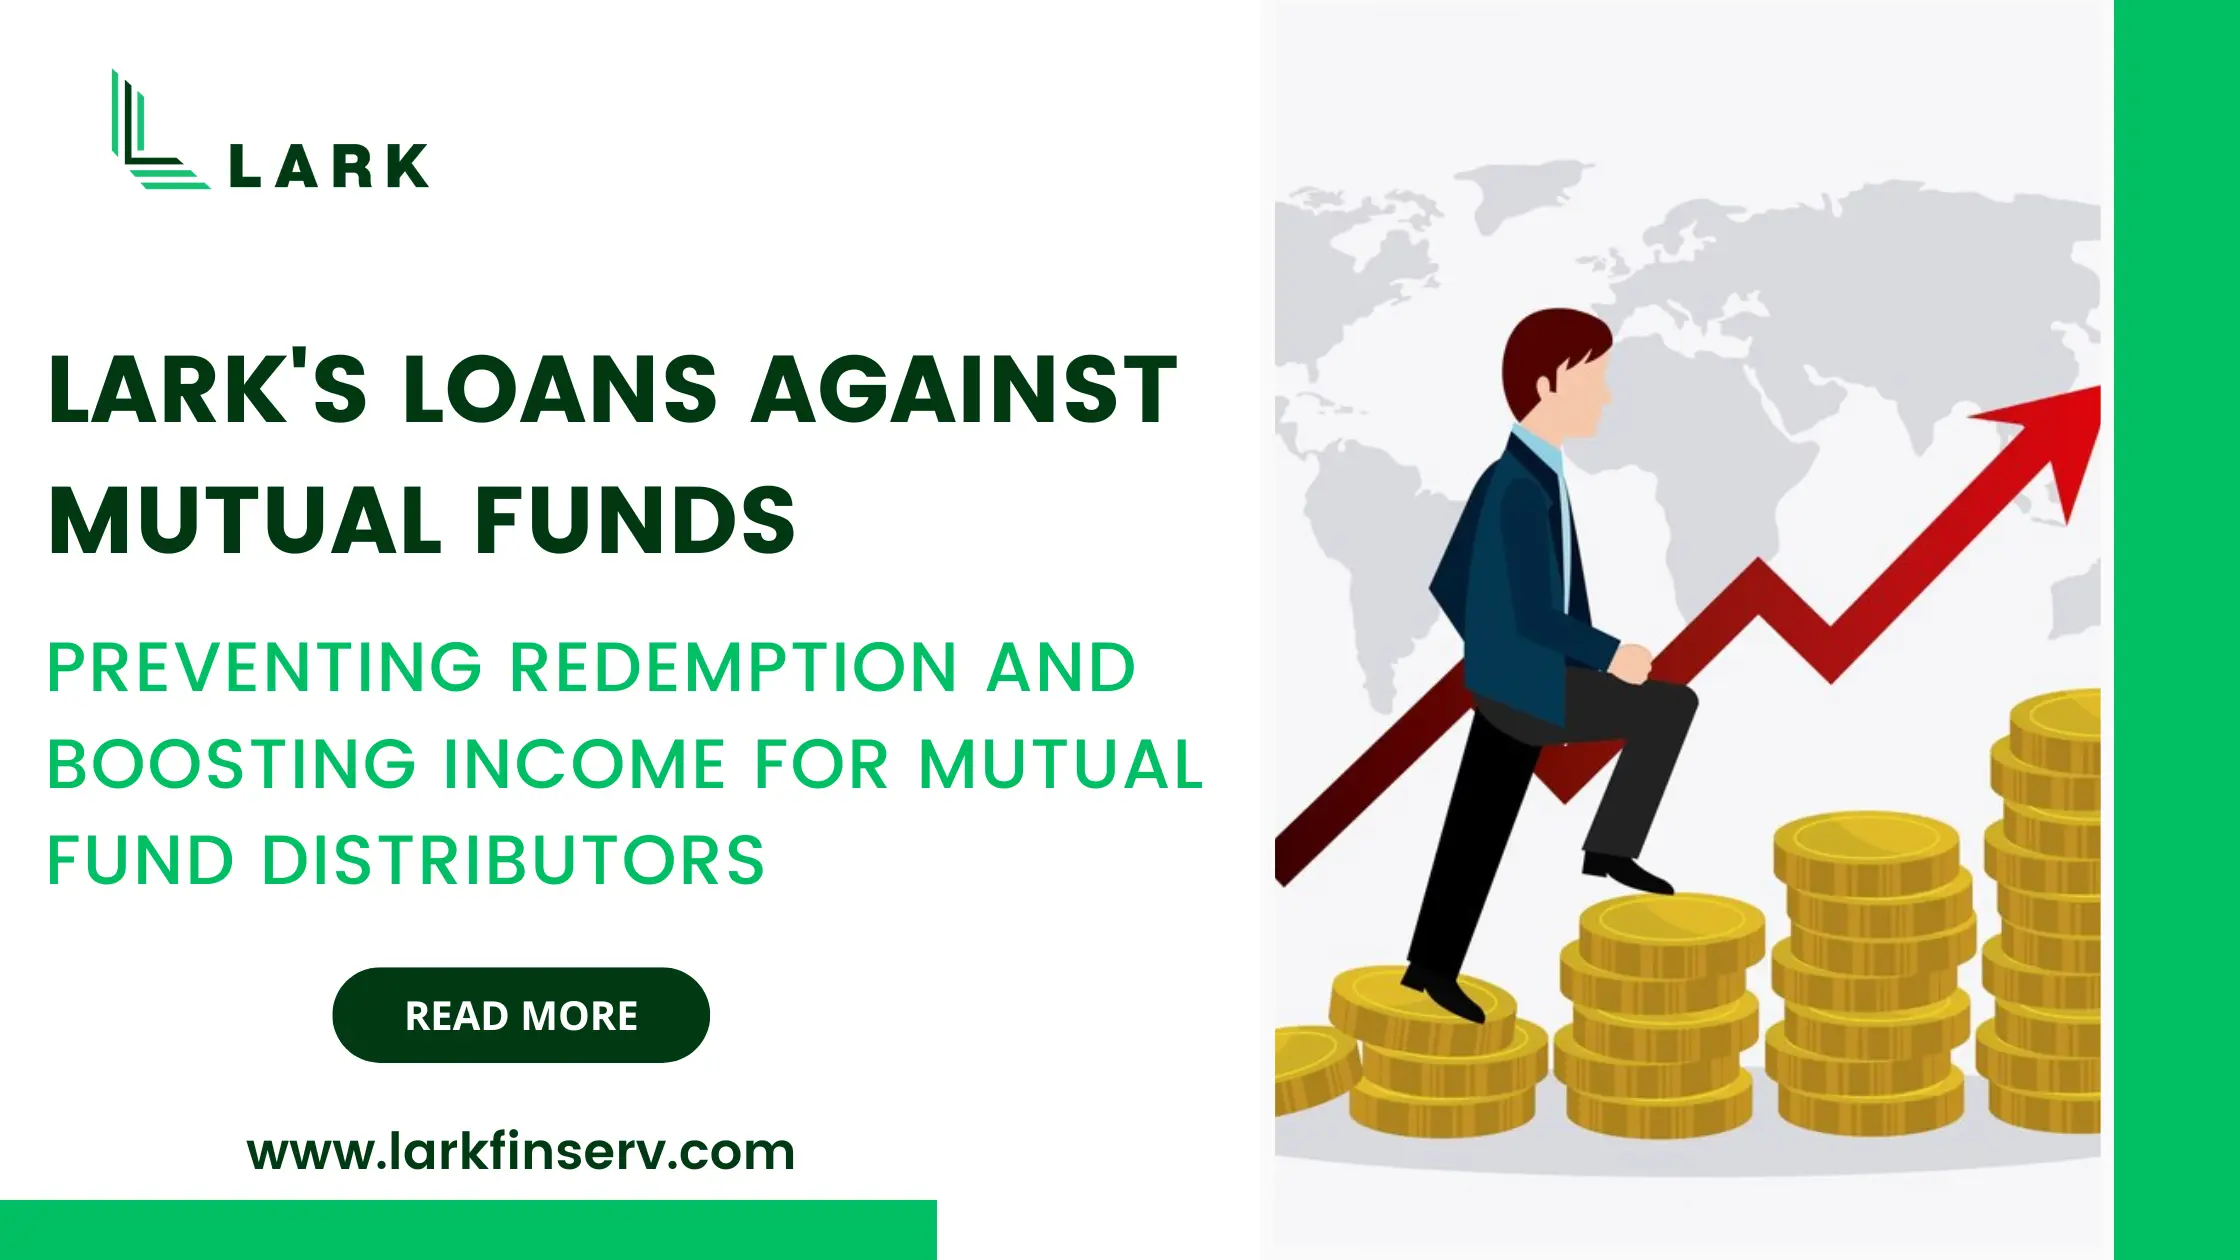 LARK's Loans Against Mutual Funds: Preventing Redemption and Boosting Income for Mutual Fund Distributors